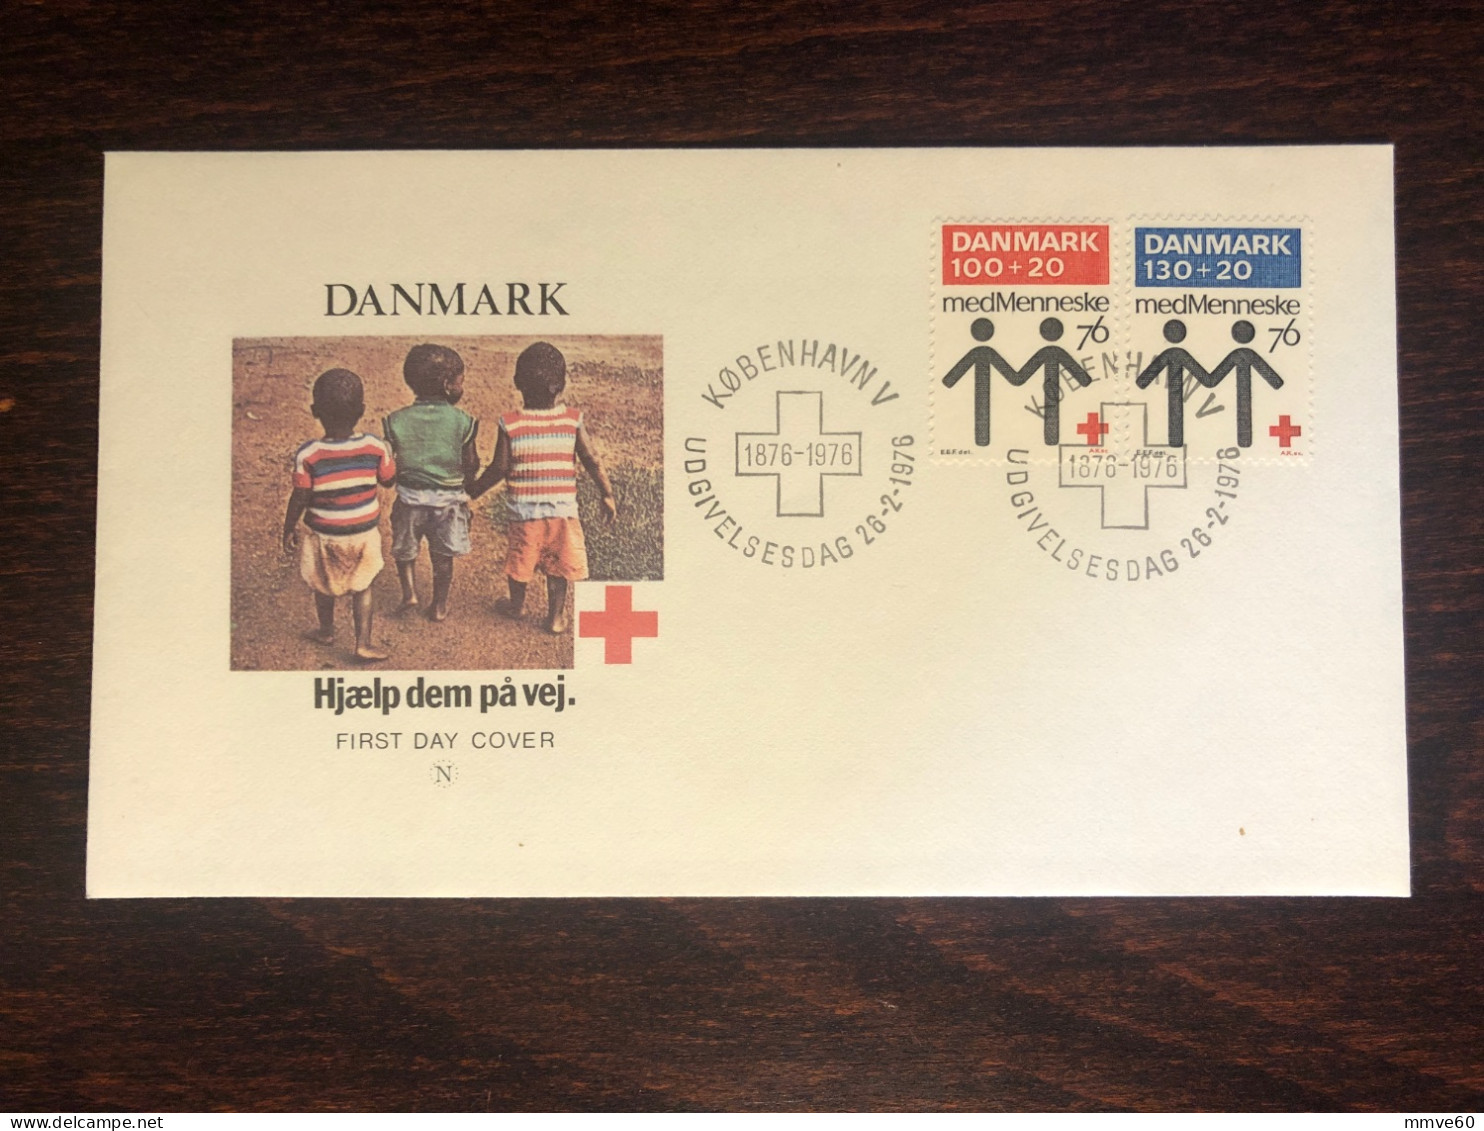 DENMARK FDC 1976 YEAR RED CROSS HEALTH MEDICINE - Covers & Documents